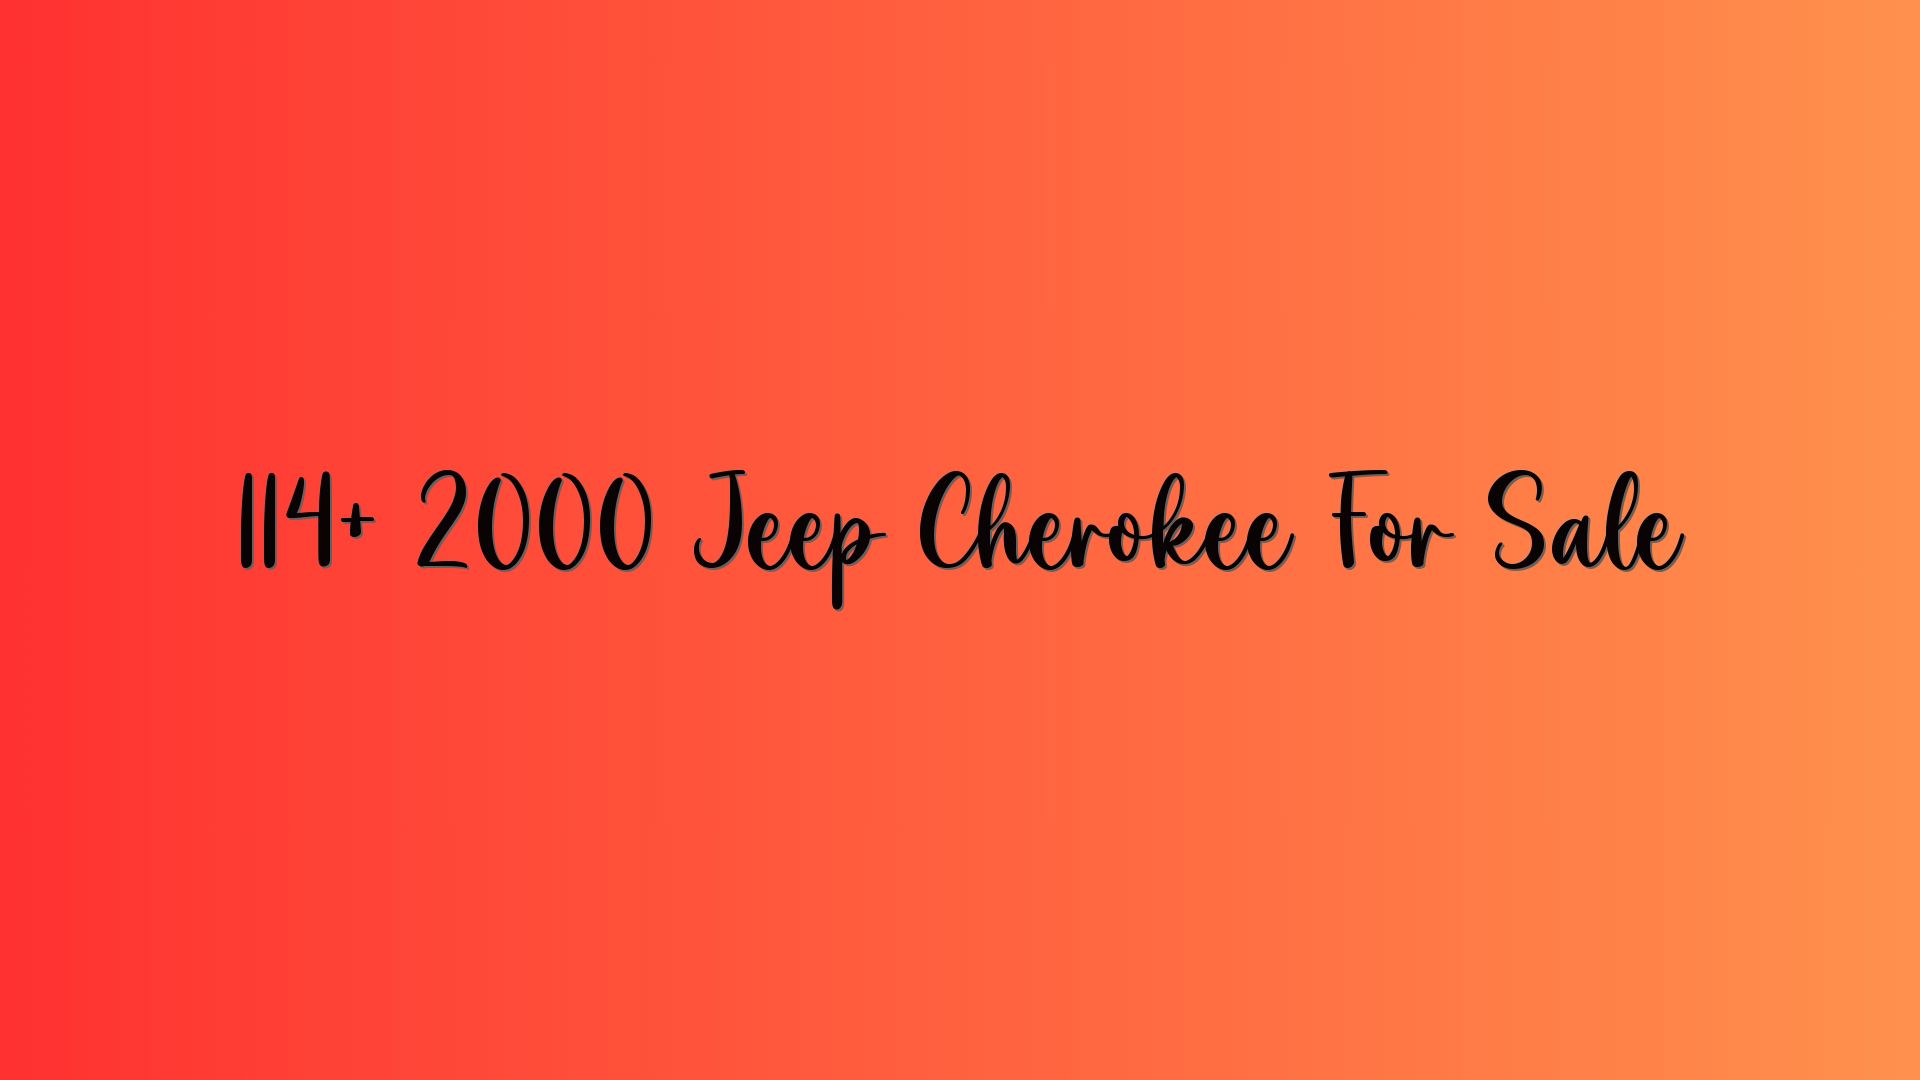 114+ 2000 Jeep Cherokee For Sale